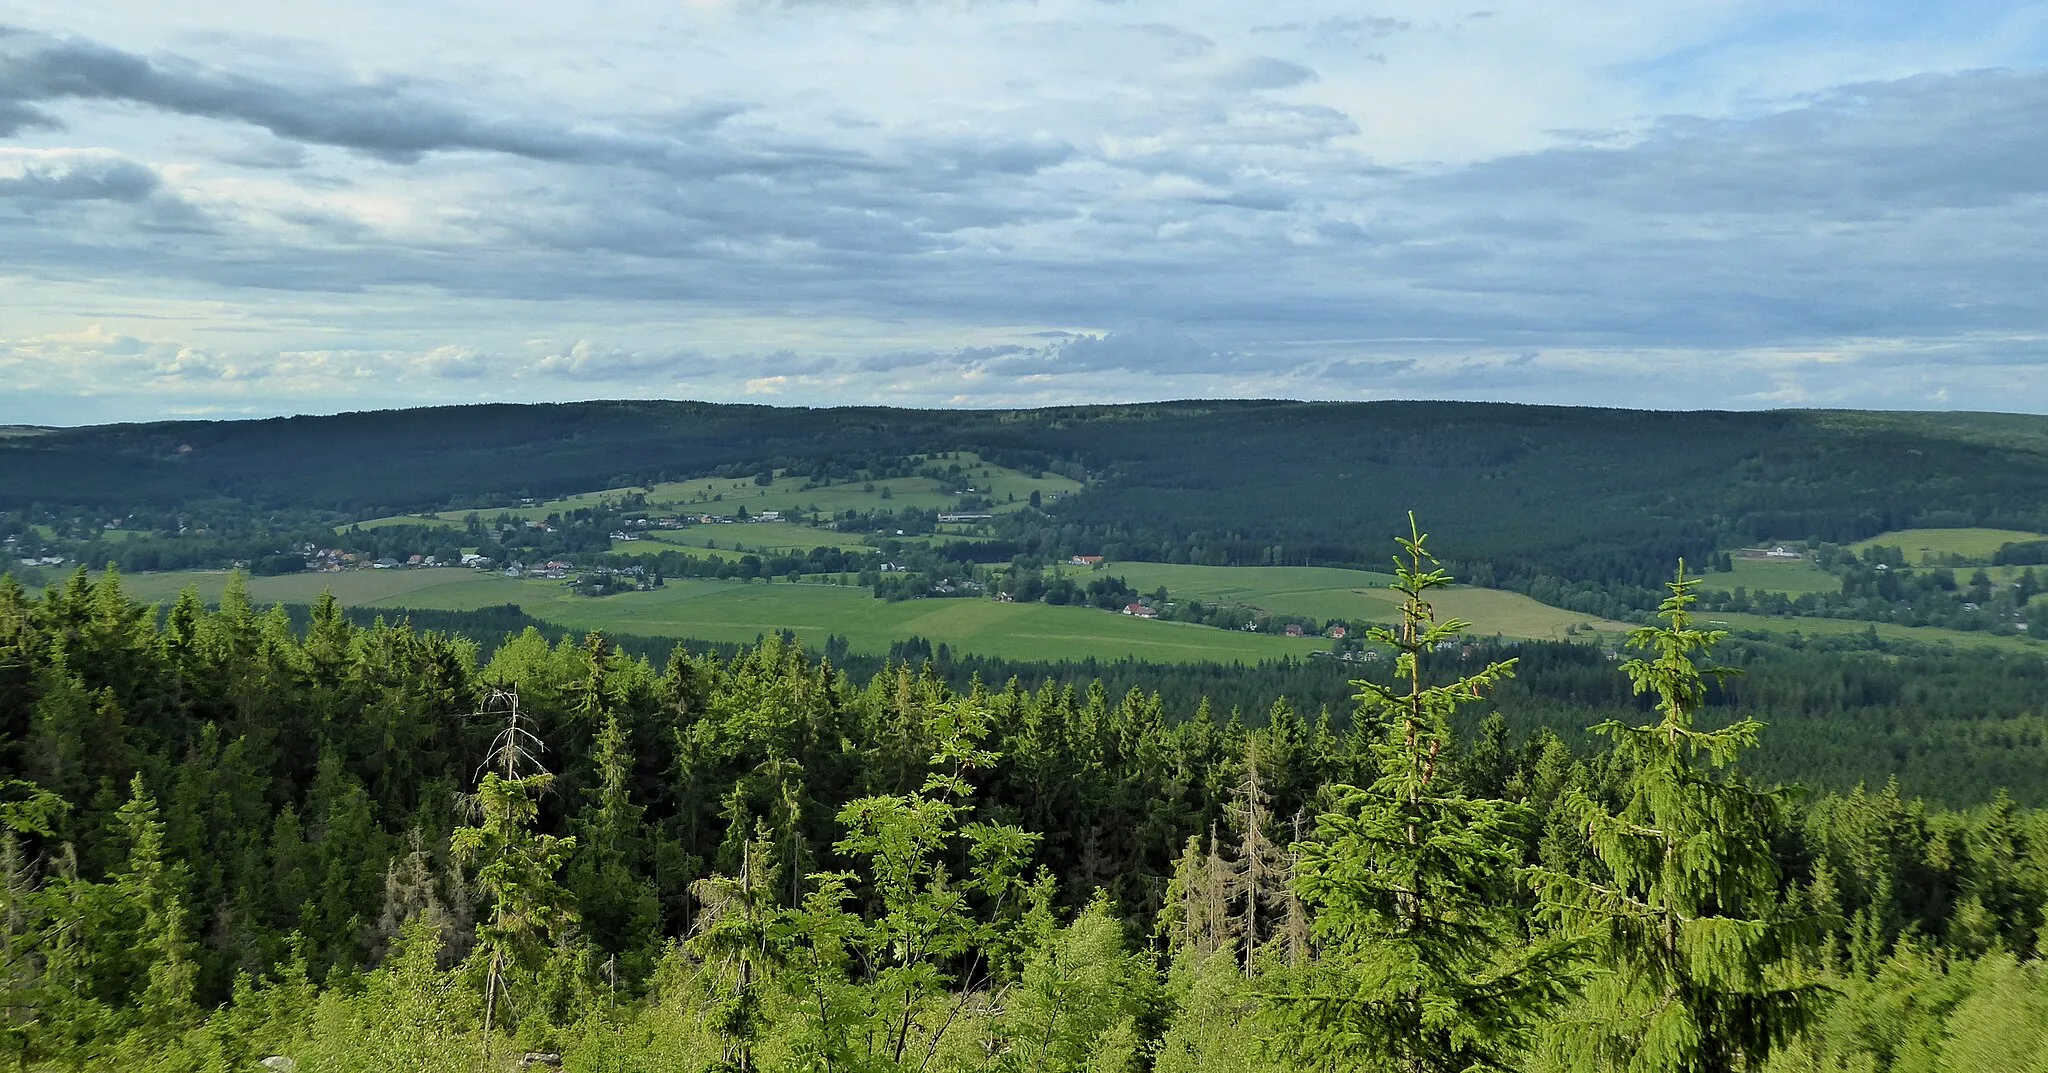 Photo showing: "Borovský" forest (forest massif on the horizon) is a landscape area and a geomorphological district in the northern part of "Žďárské" Hills. It is part of the "Hornosvratecká" Highlands in regional breakdown shape of the earth's surface of Czechia. View from the top of the Malinska Rock (811 m above sea level) in "Devítiskalská" Highlands. Photo location: Czechia, Vysočina Region, villages Křižánky.